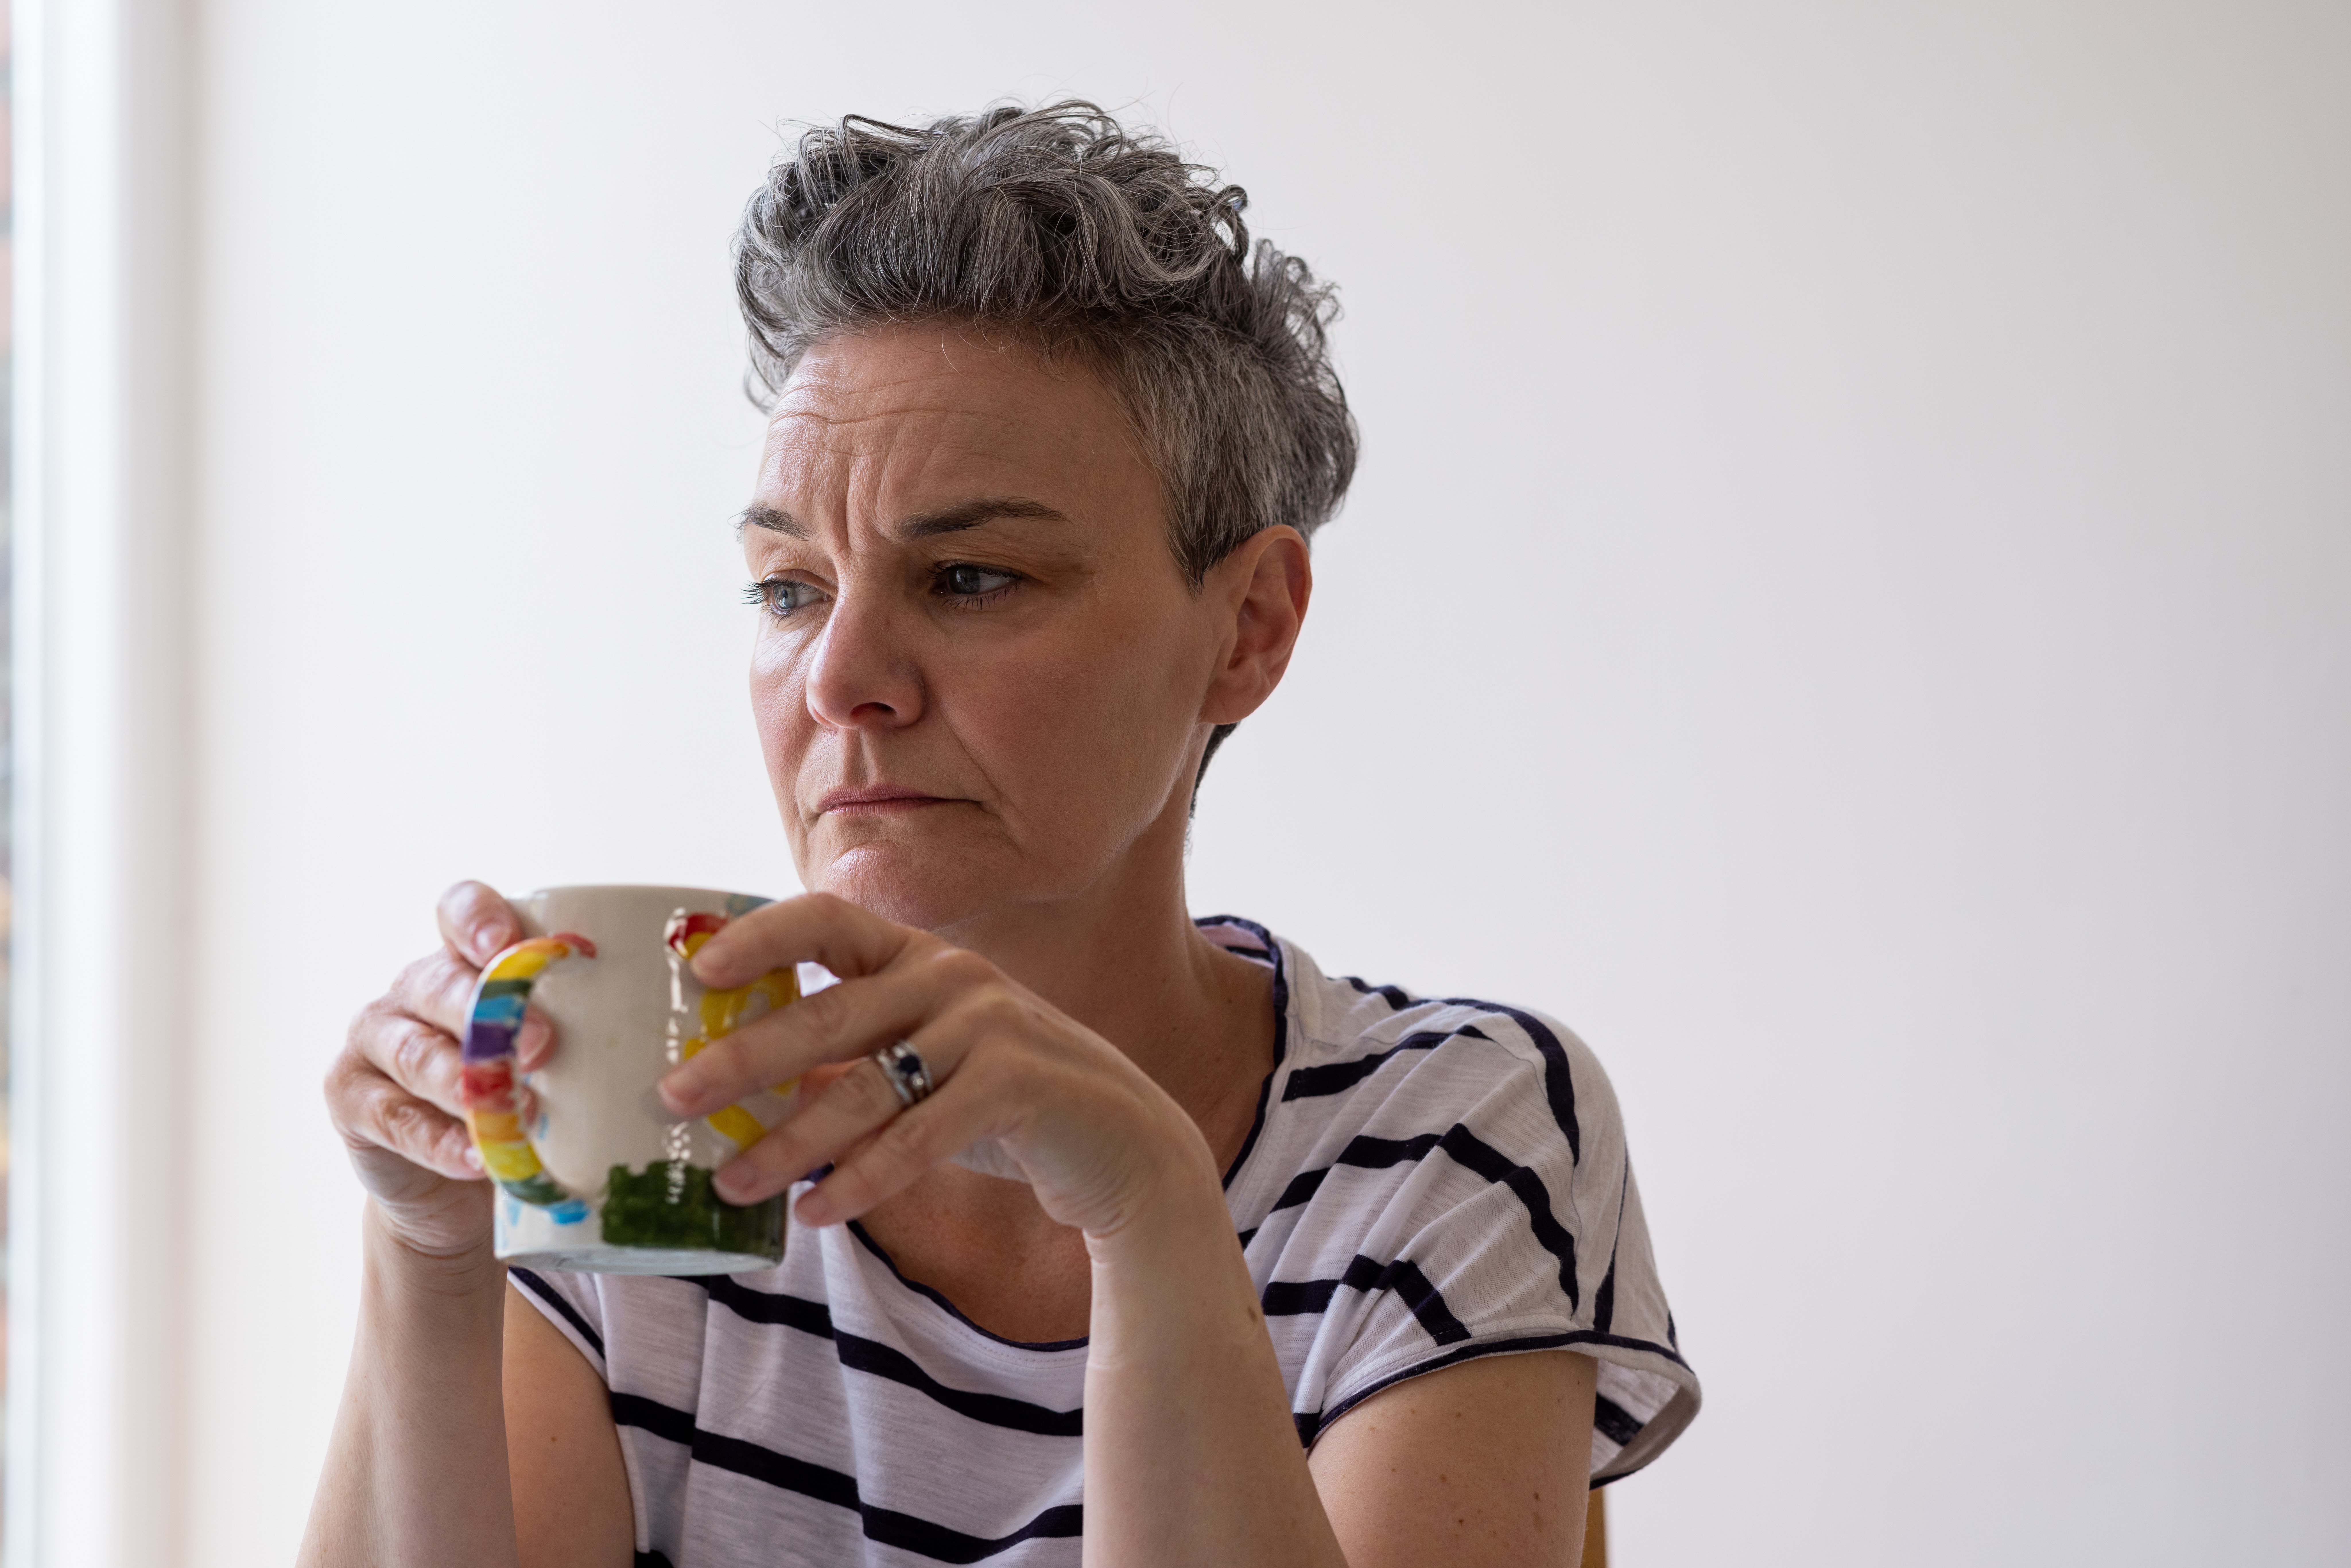 Close-up of a mature female sitting at a table in a kitchen having a cup of tea with a negative emotion on her face. She is taking time to herself overthinking personal issues.